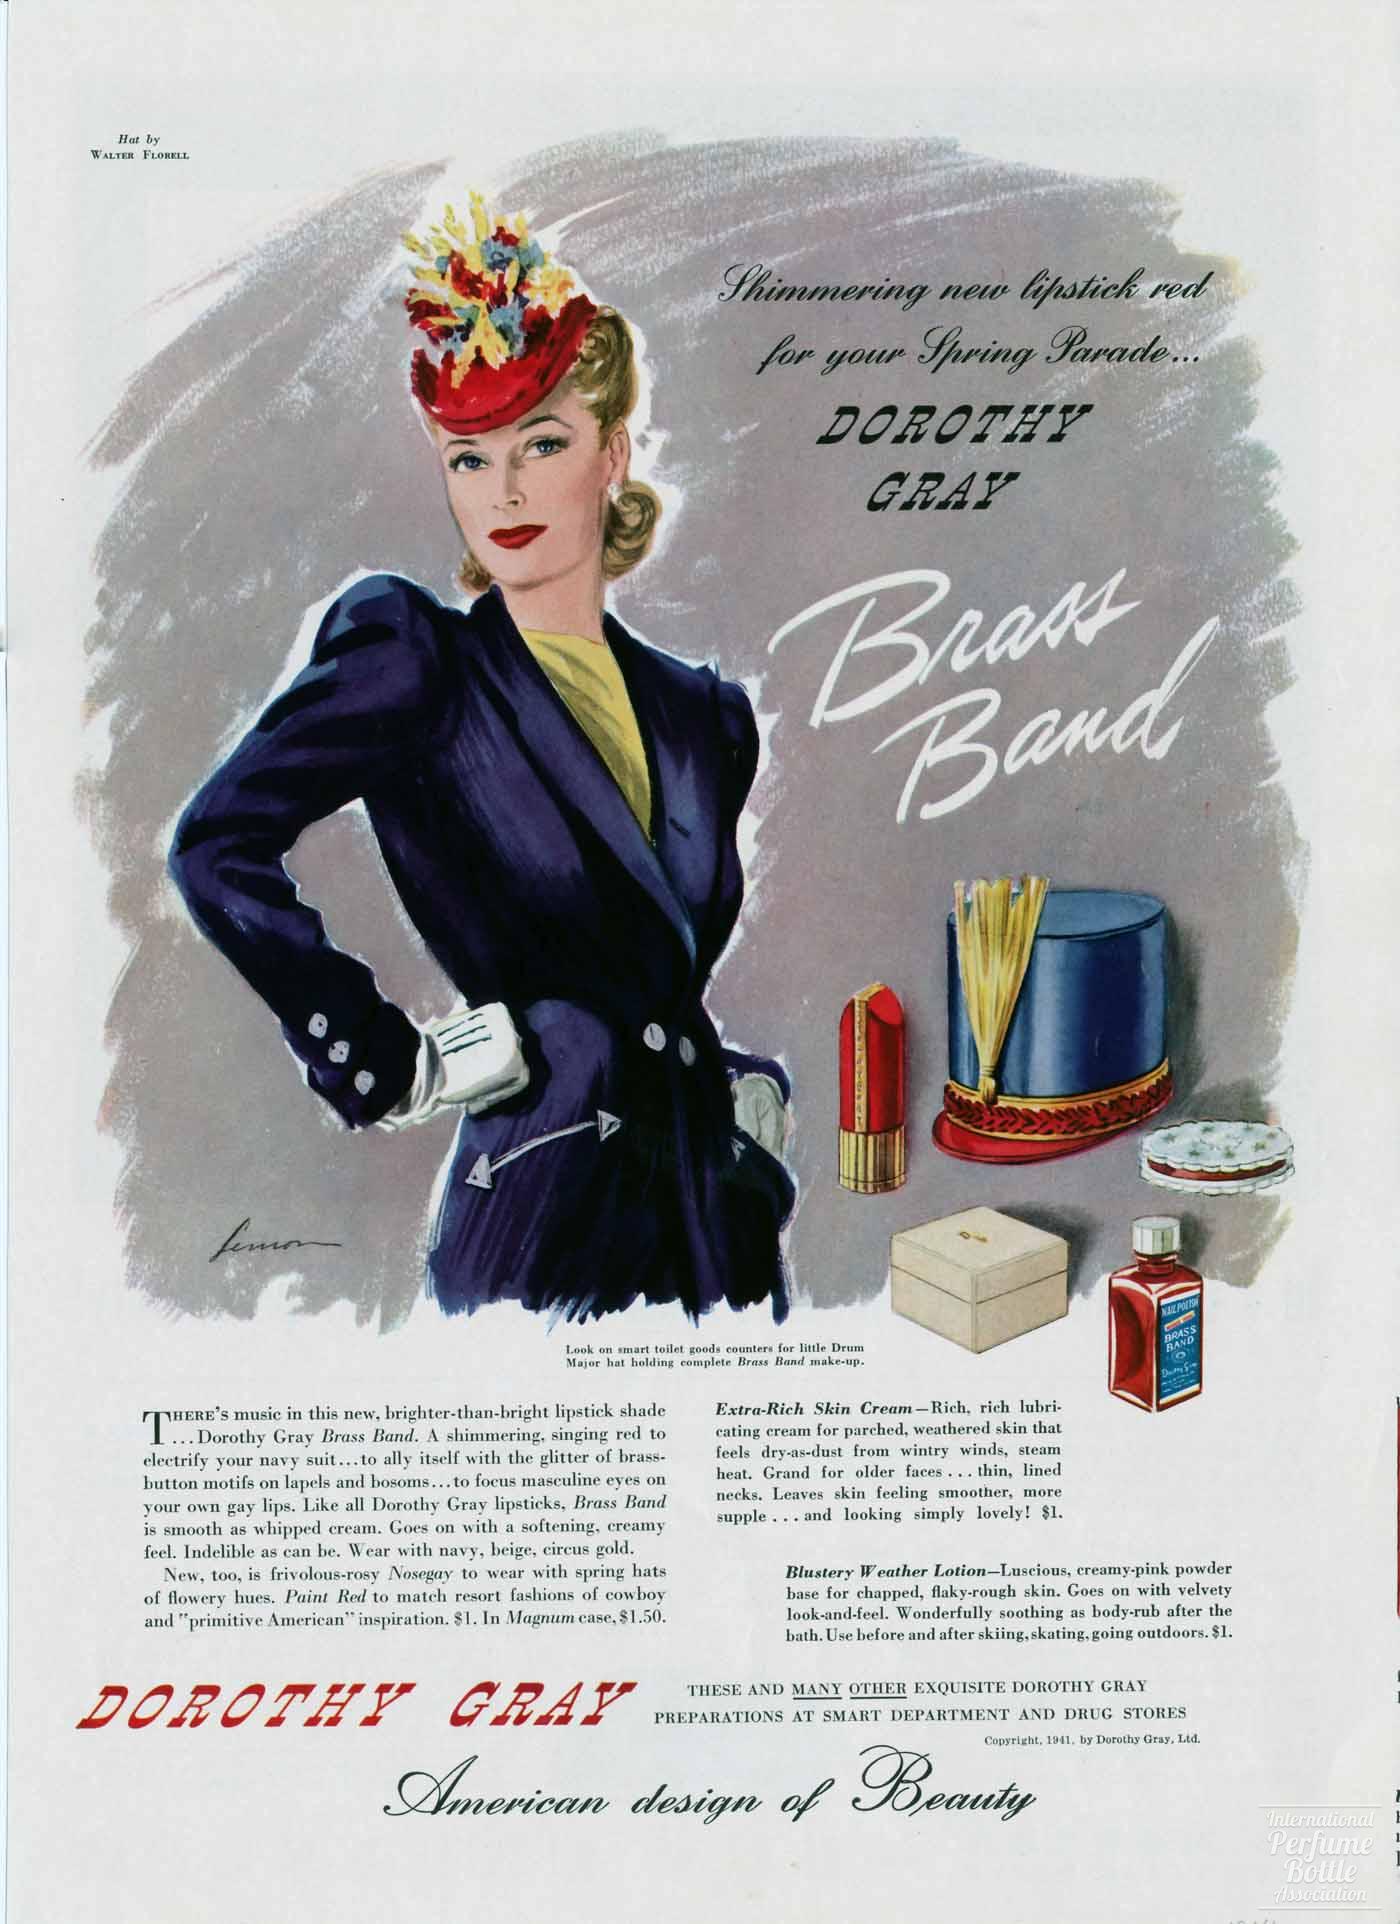 "Brass Band" Lipstick and Cosmetics by Dorothy Gray Advertisement - 1941